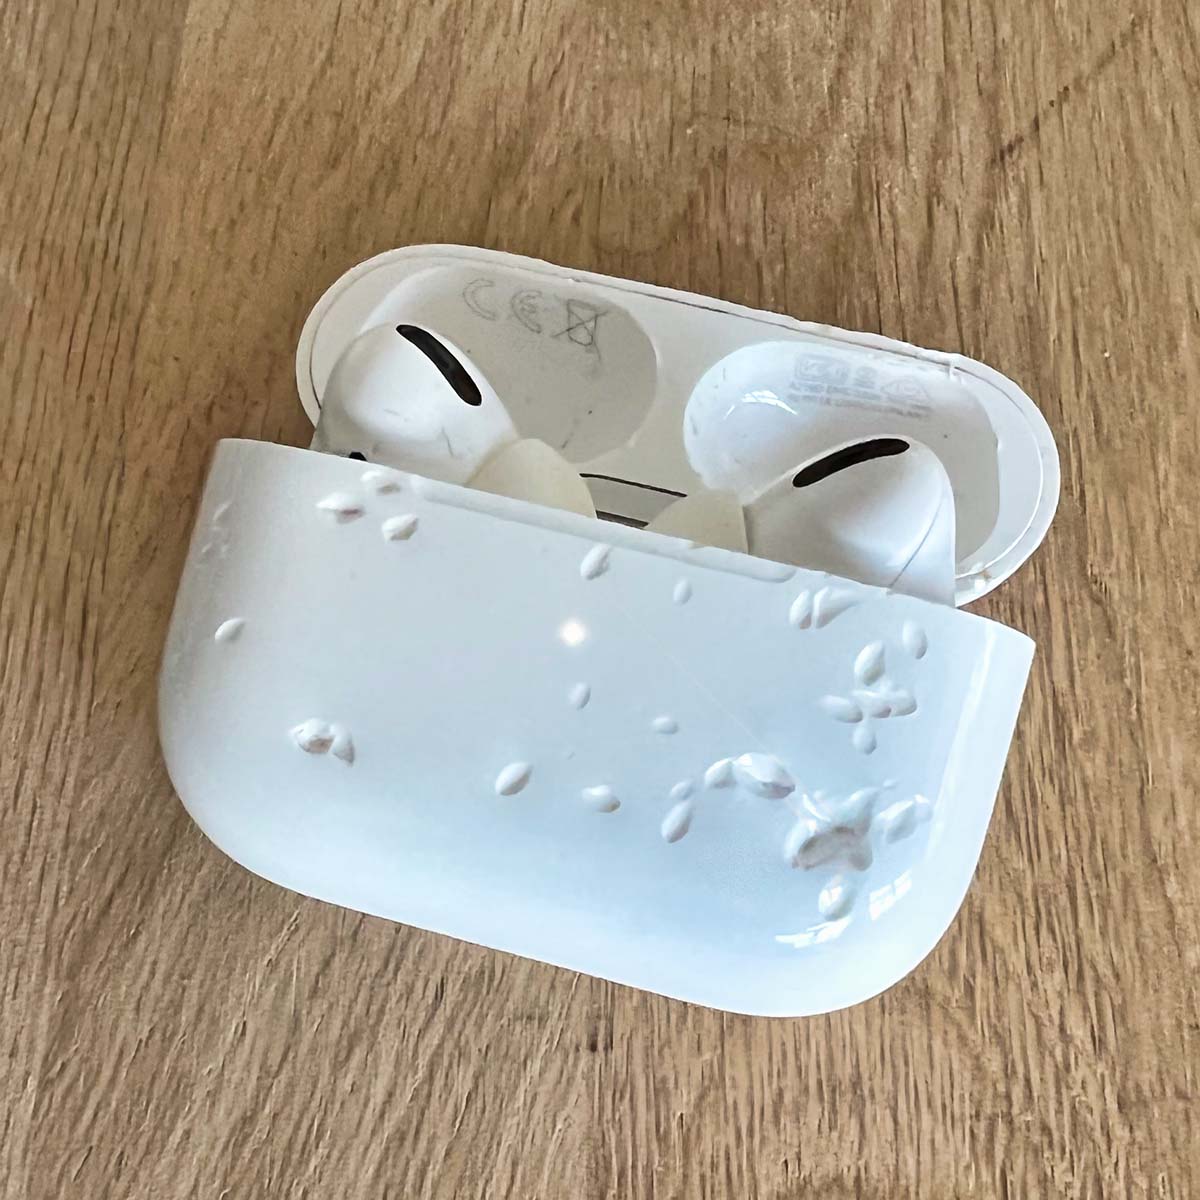 Potential Brick pavement AirPods Pro charging case bitten - what can you do?